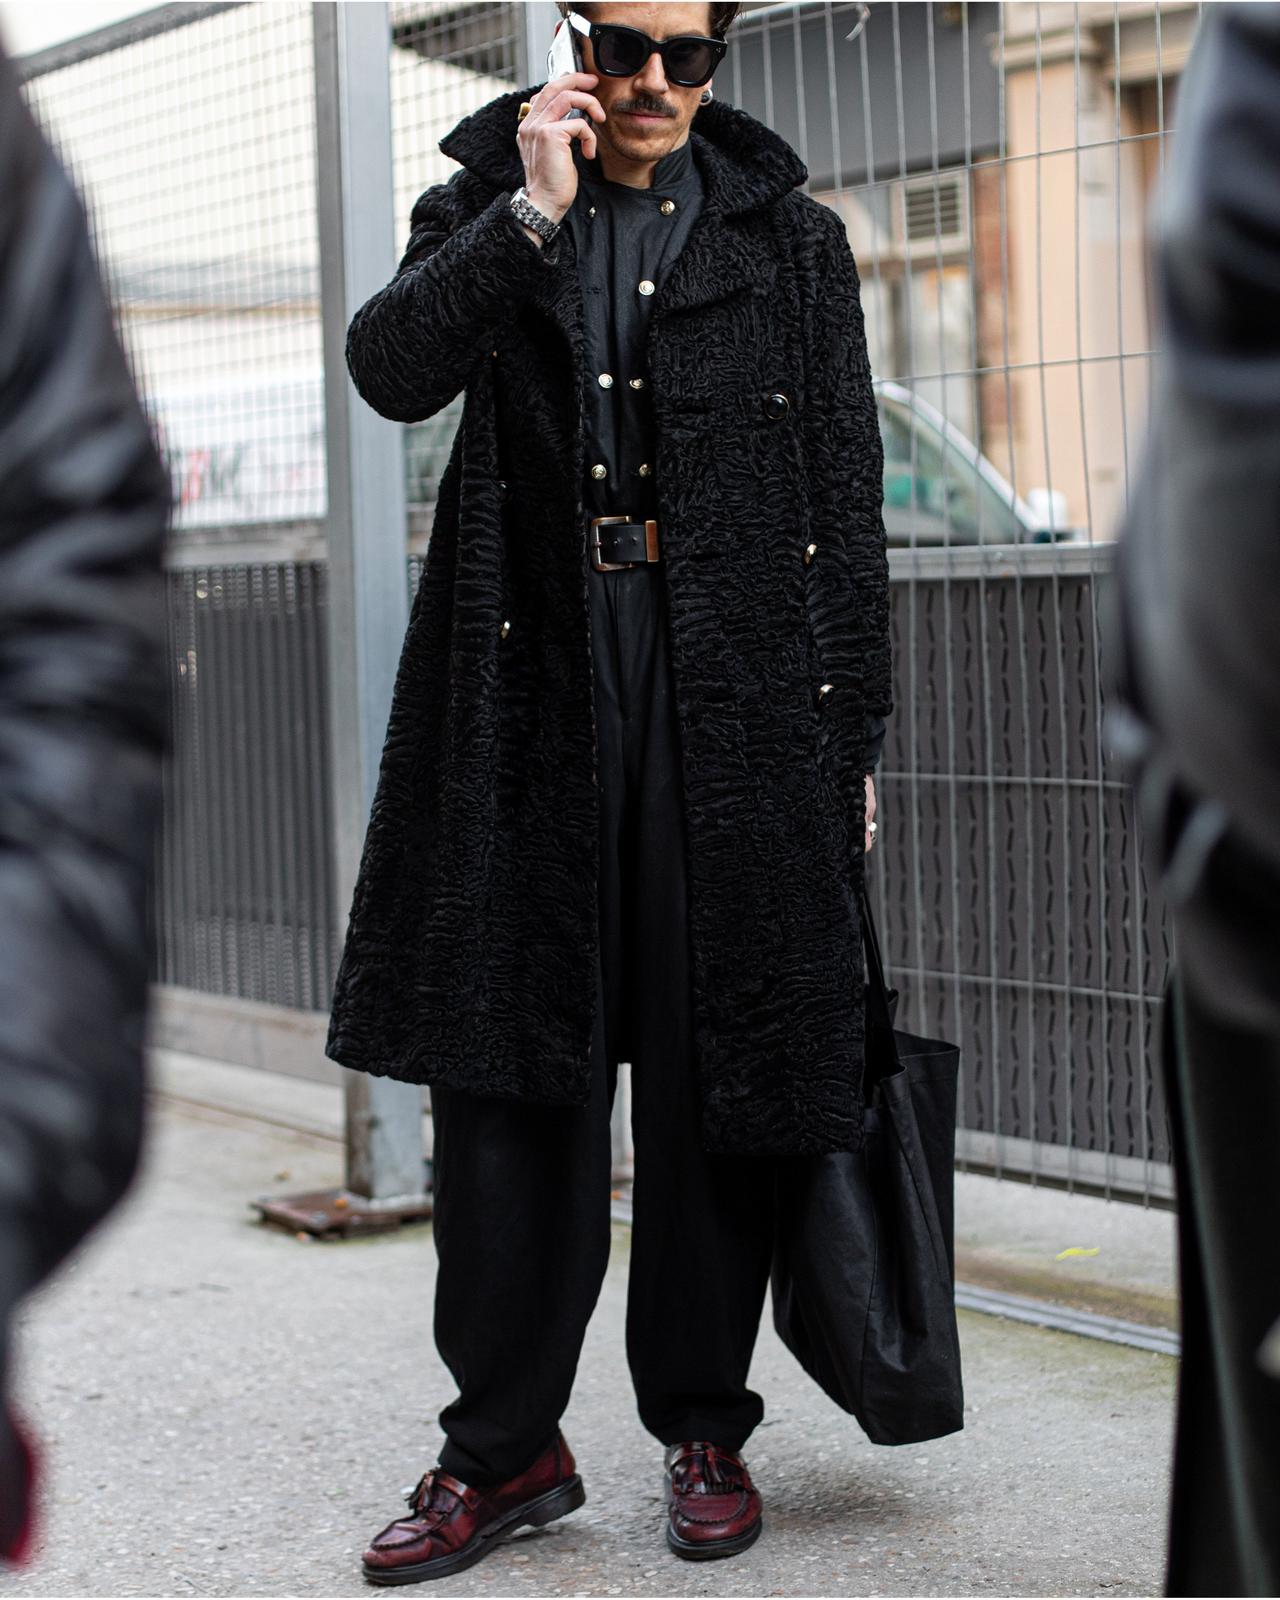 A man in a black coat talking on a cell phone